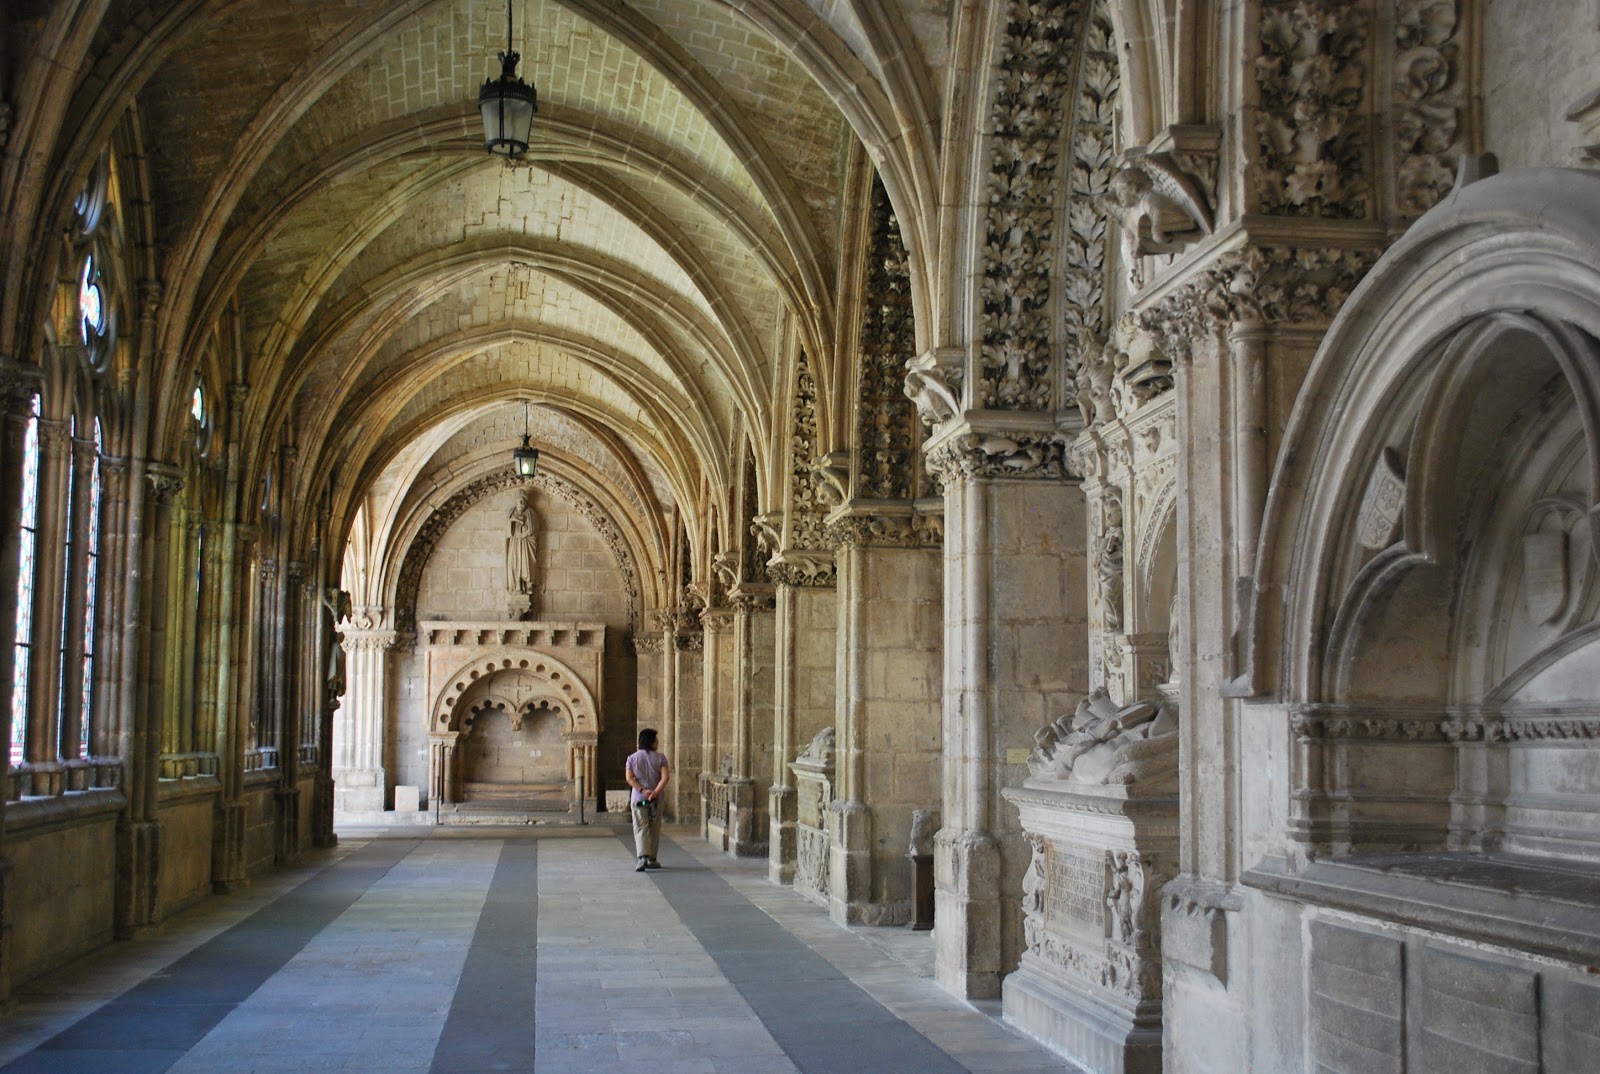 Burgos Cathedral Historical Facts and Pictures | The ...
